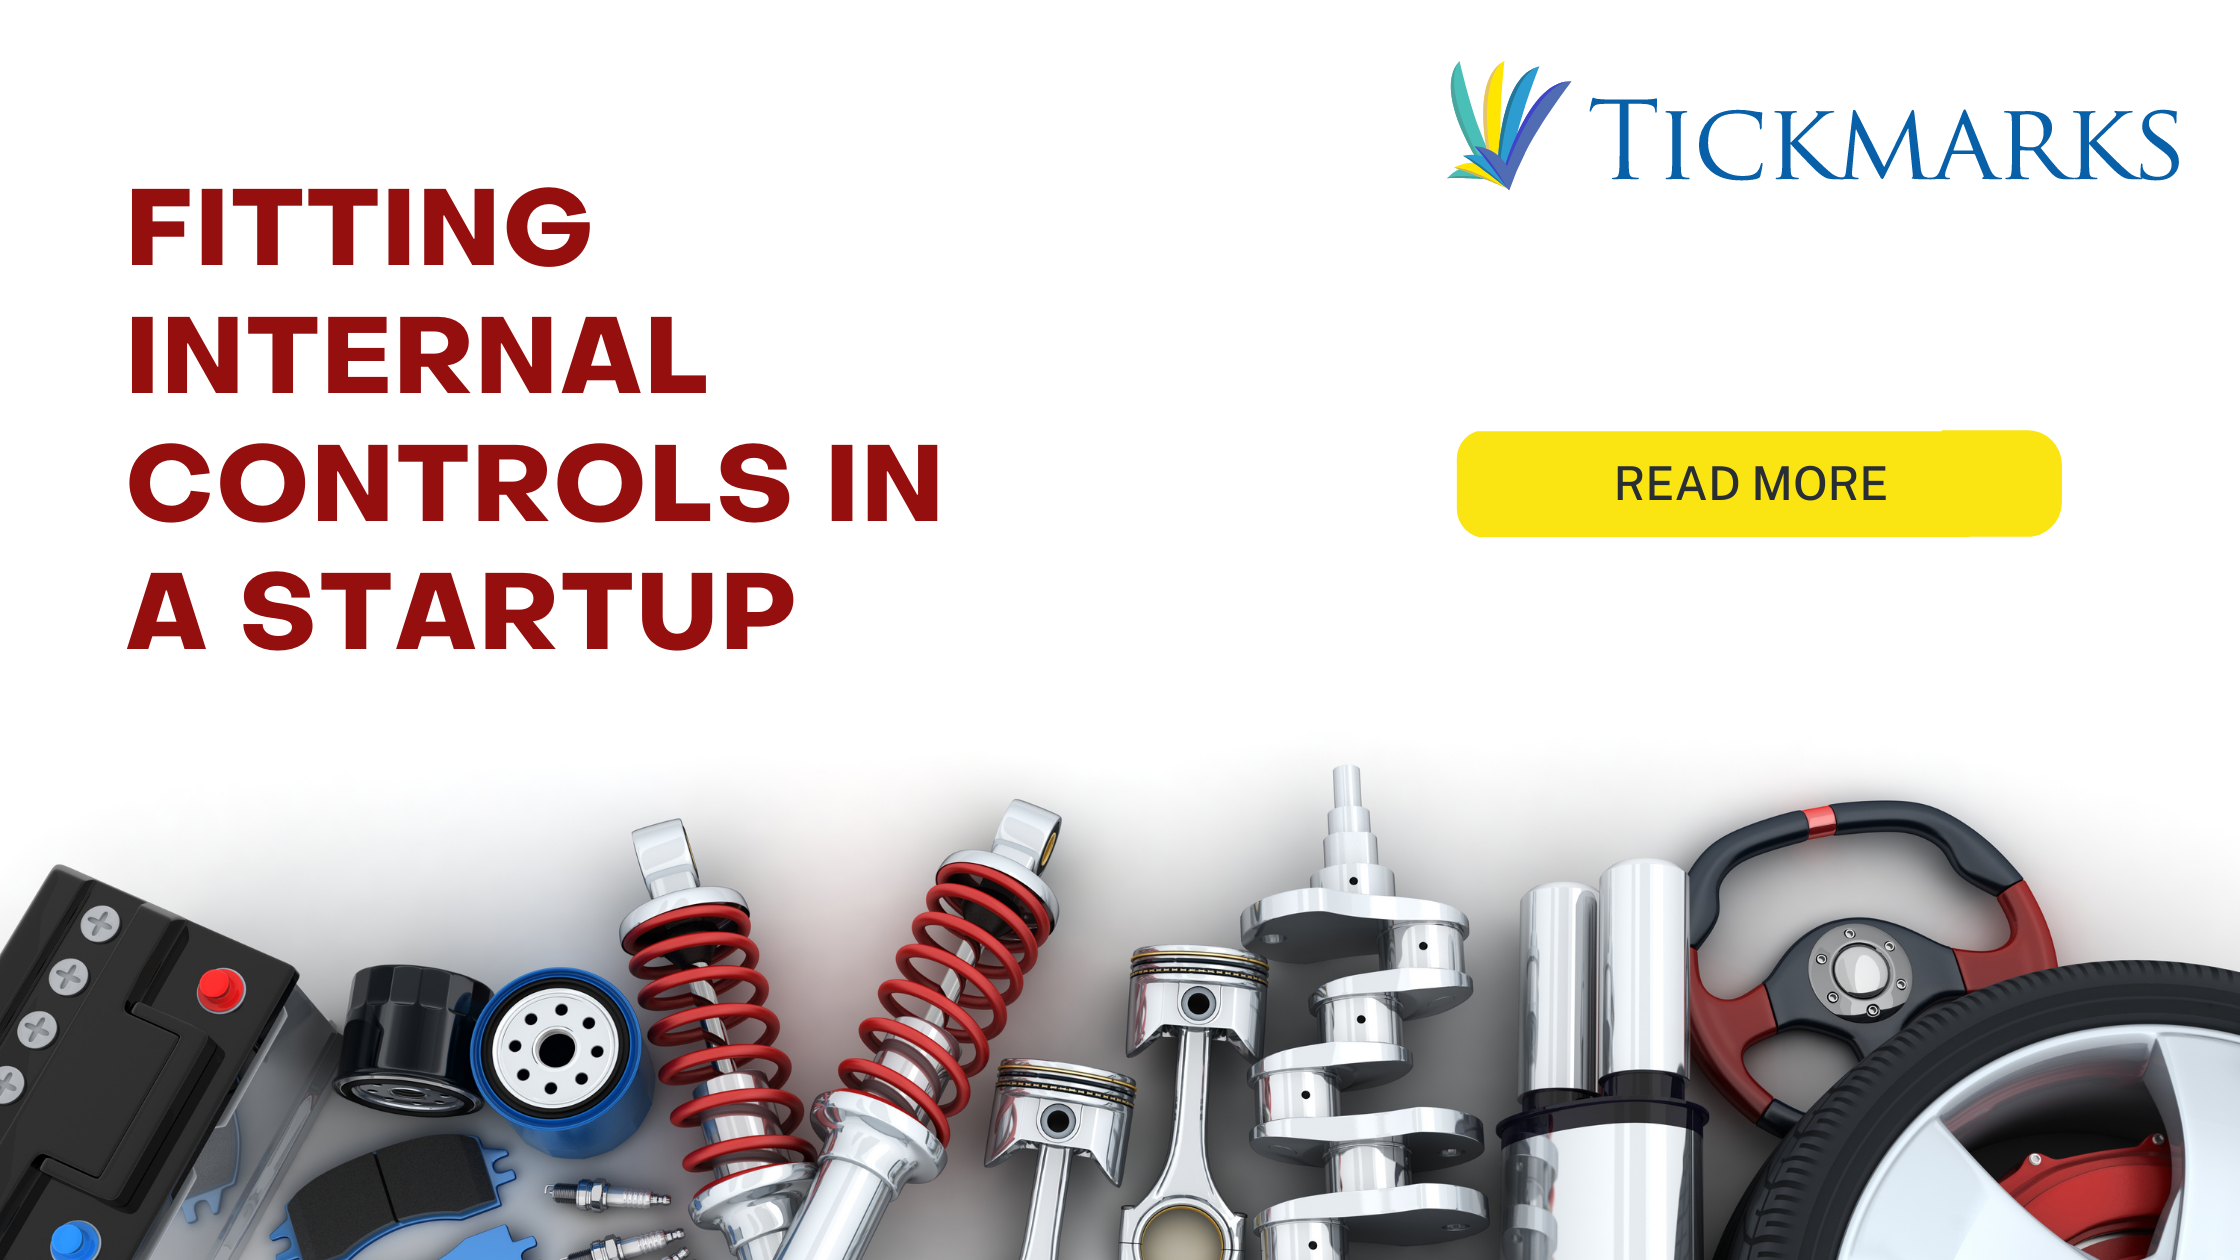 Fitting Internal Controls in a start up is like setting up internal components of a racing car.